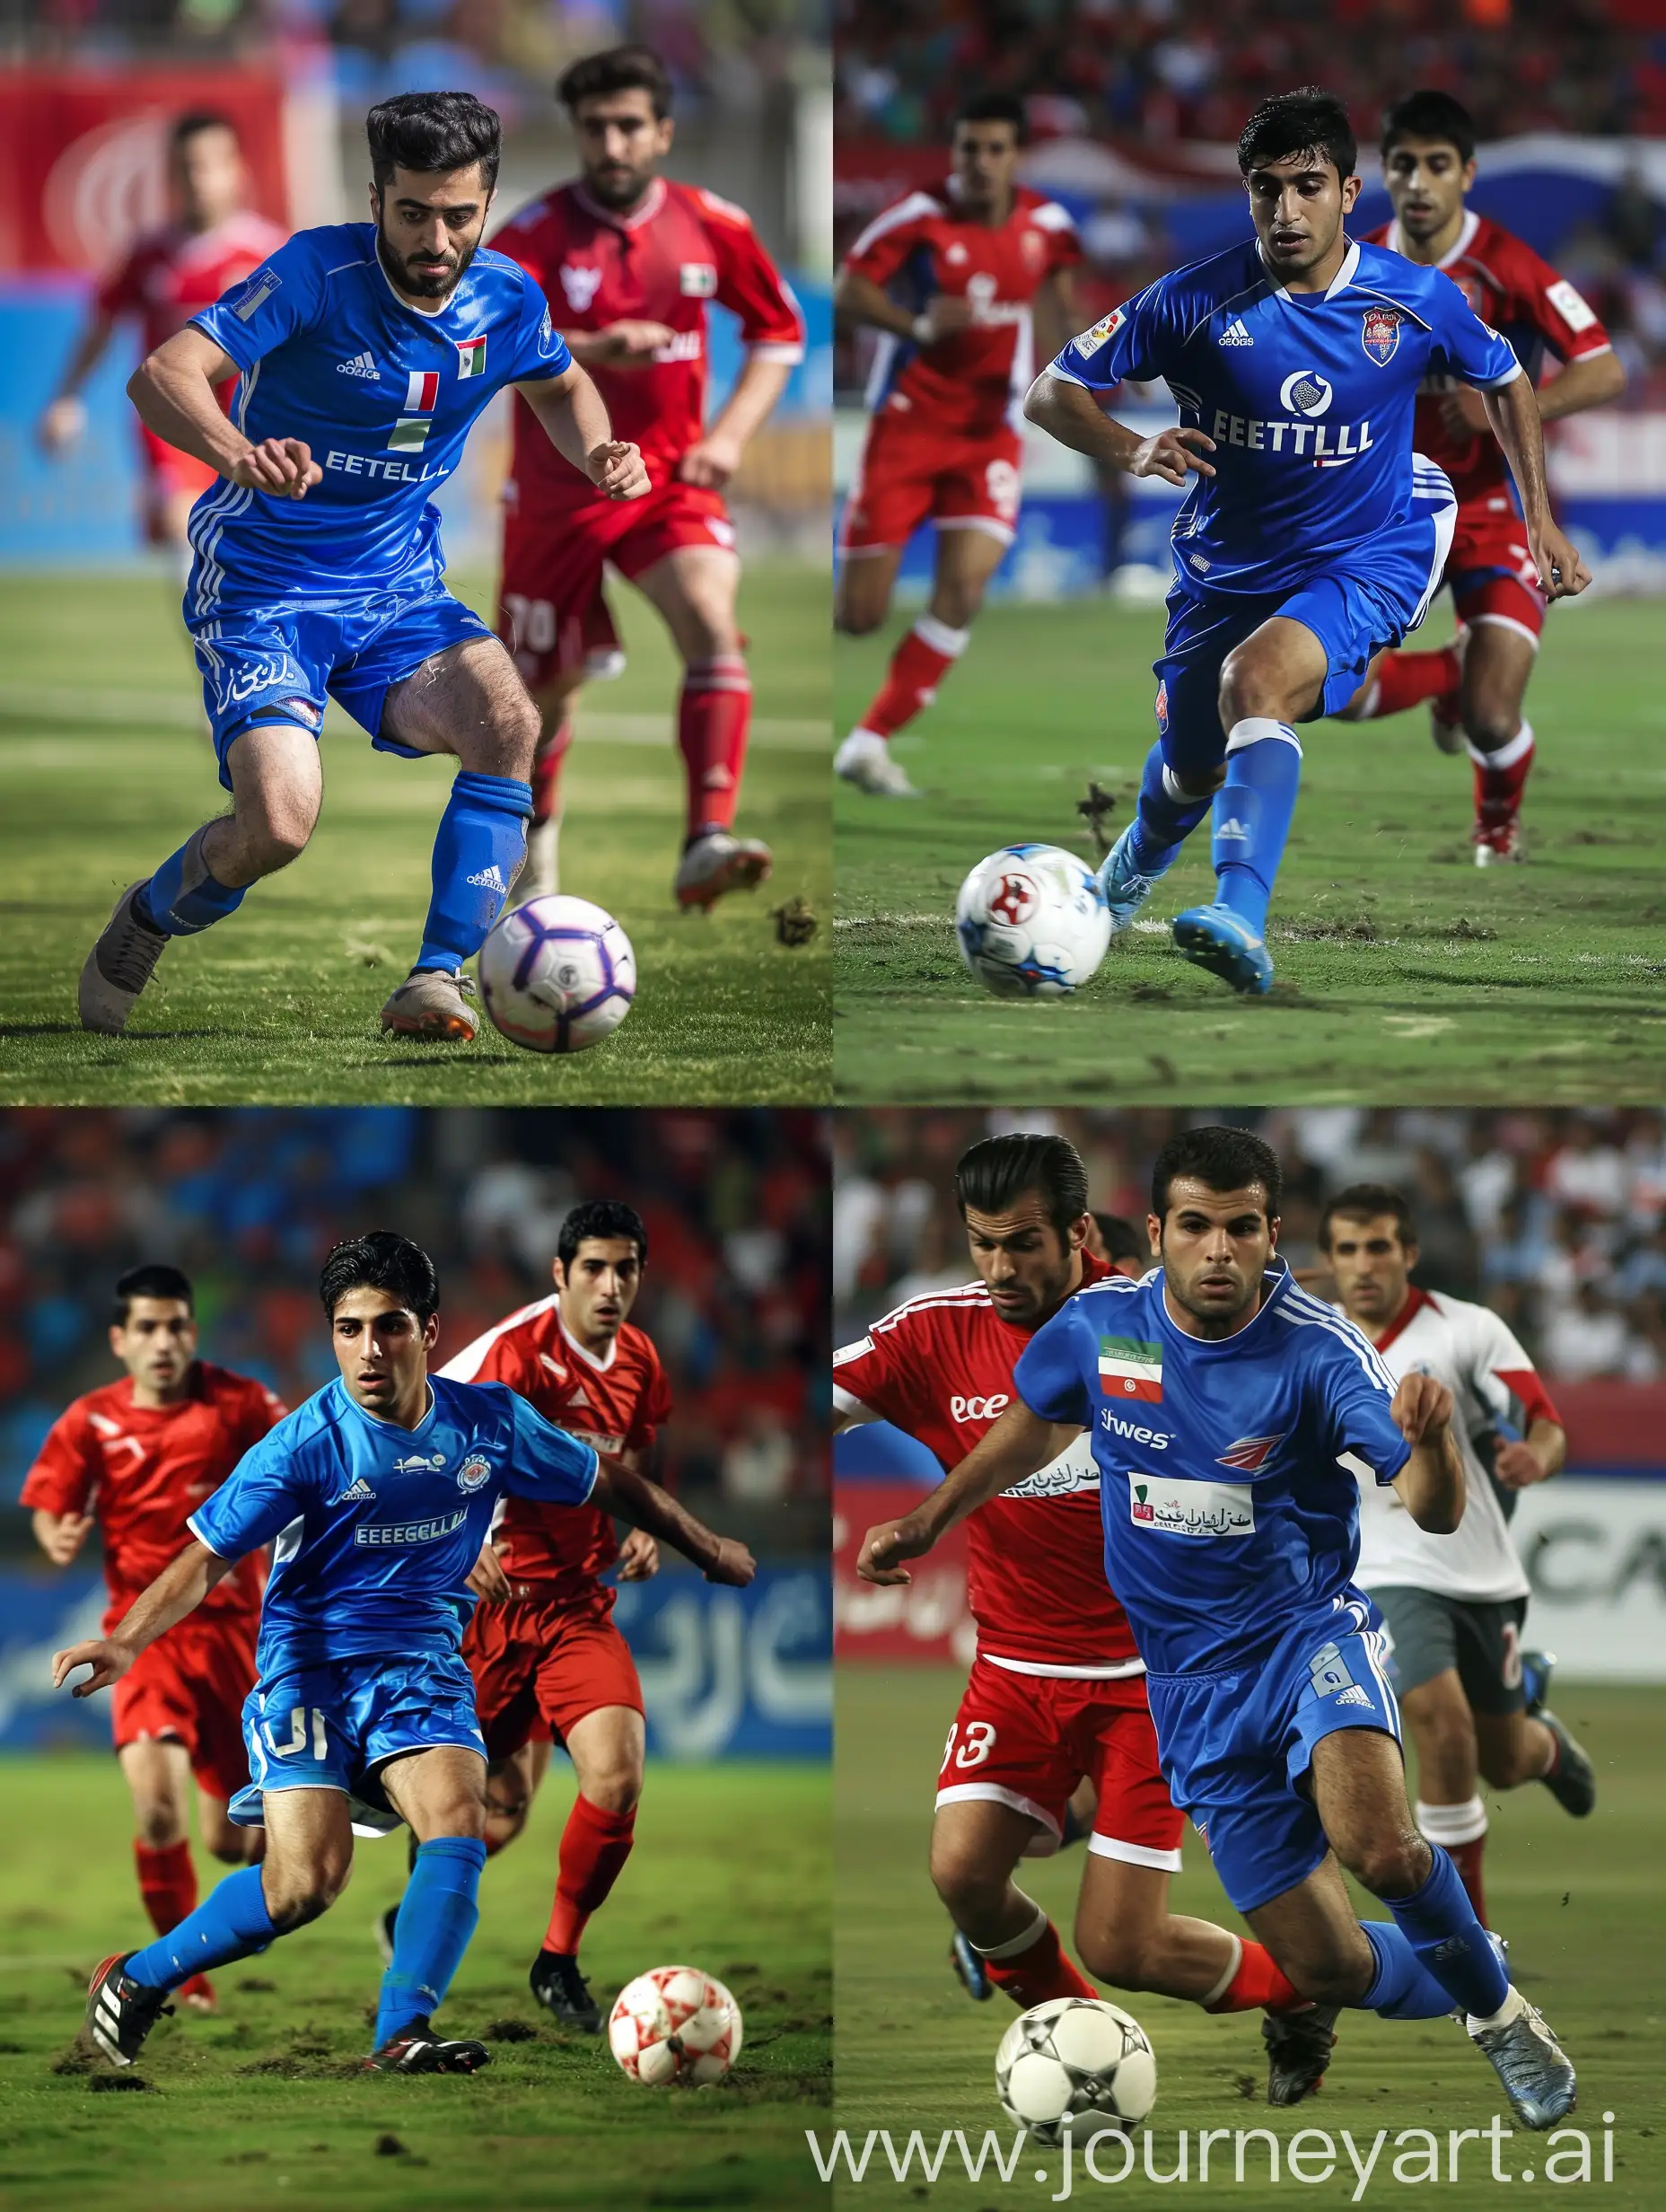 Football Derby, the capital of Iran, is being held between the two teams of Esteghlal Tehran with blue shirts and Persepolis Tehran with red shirts.